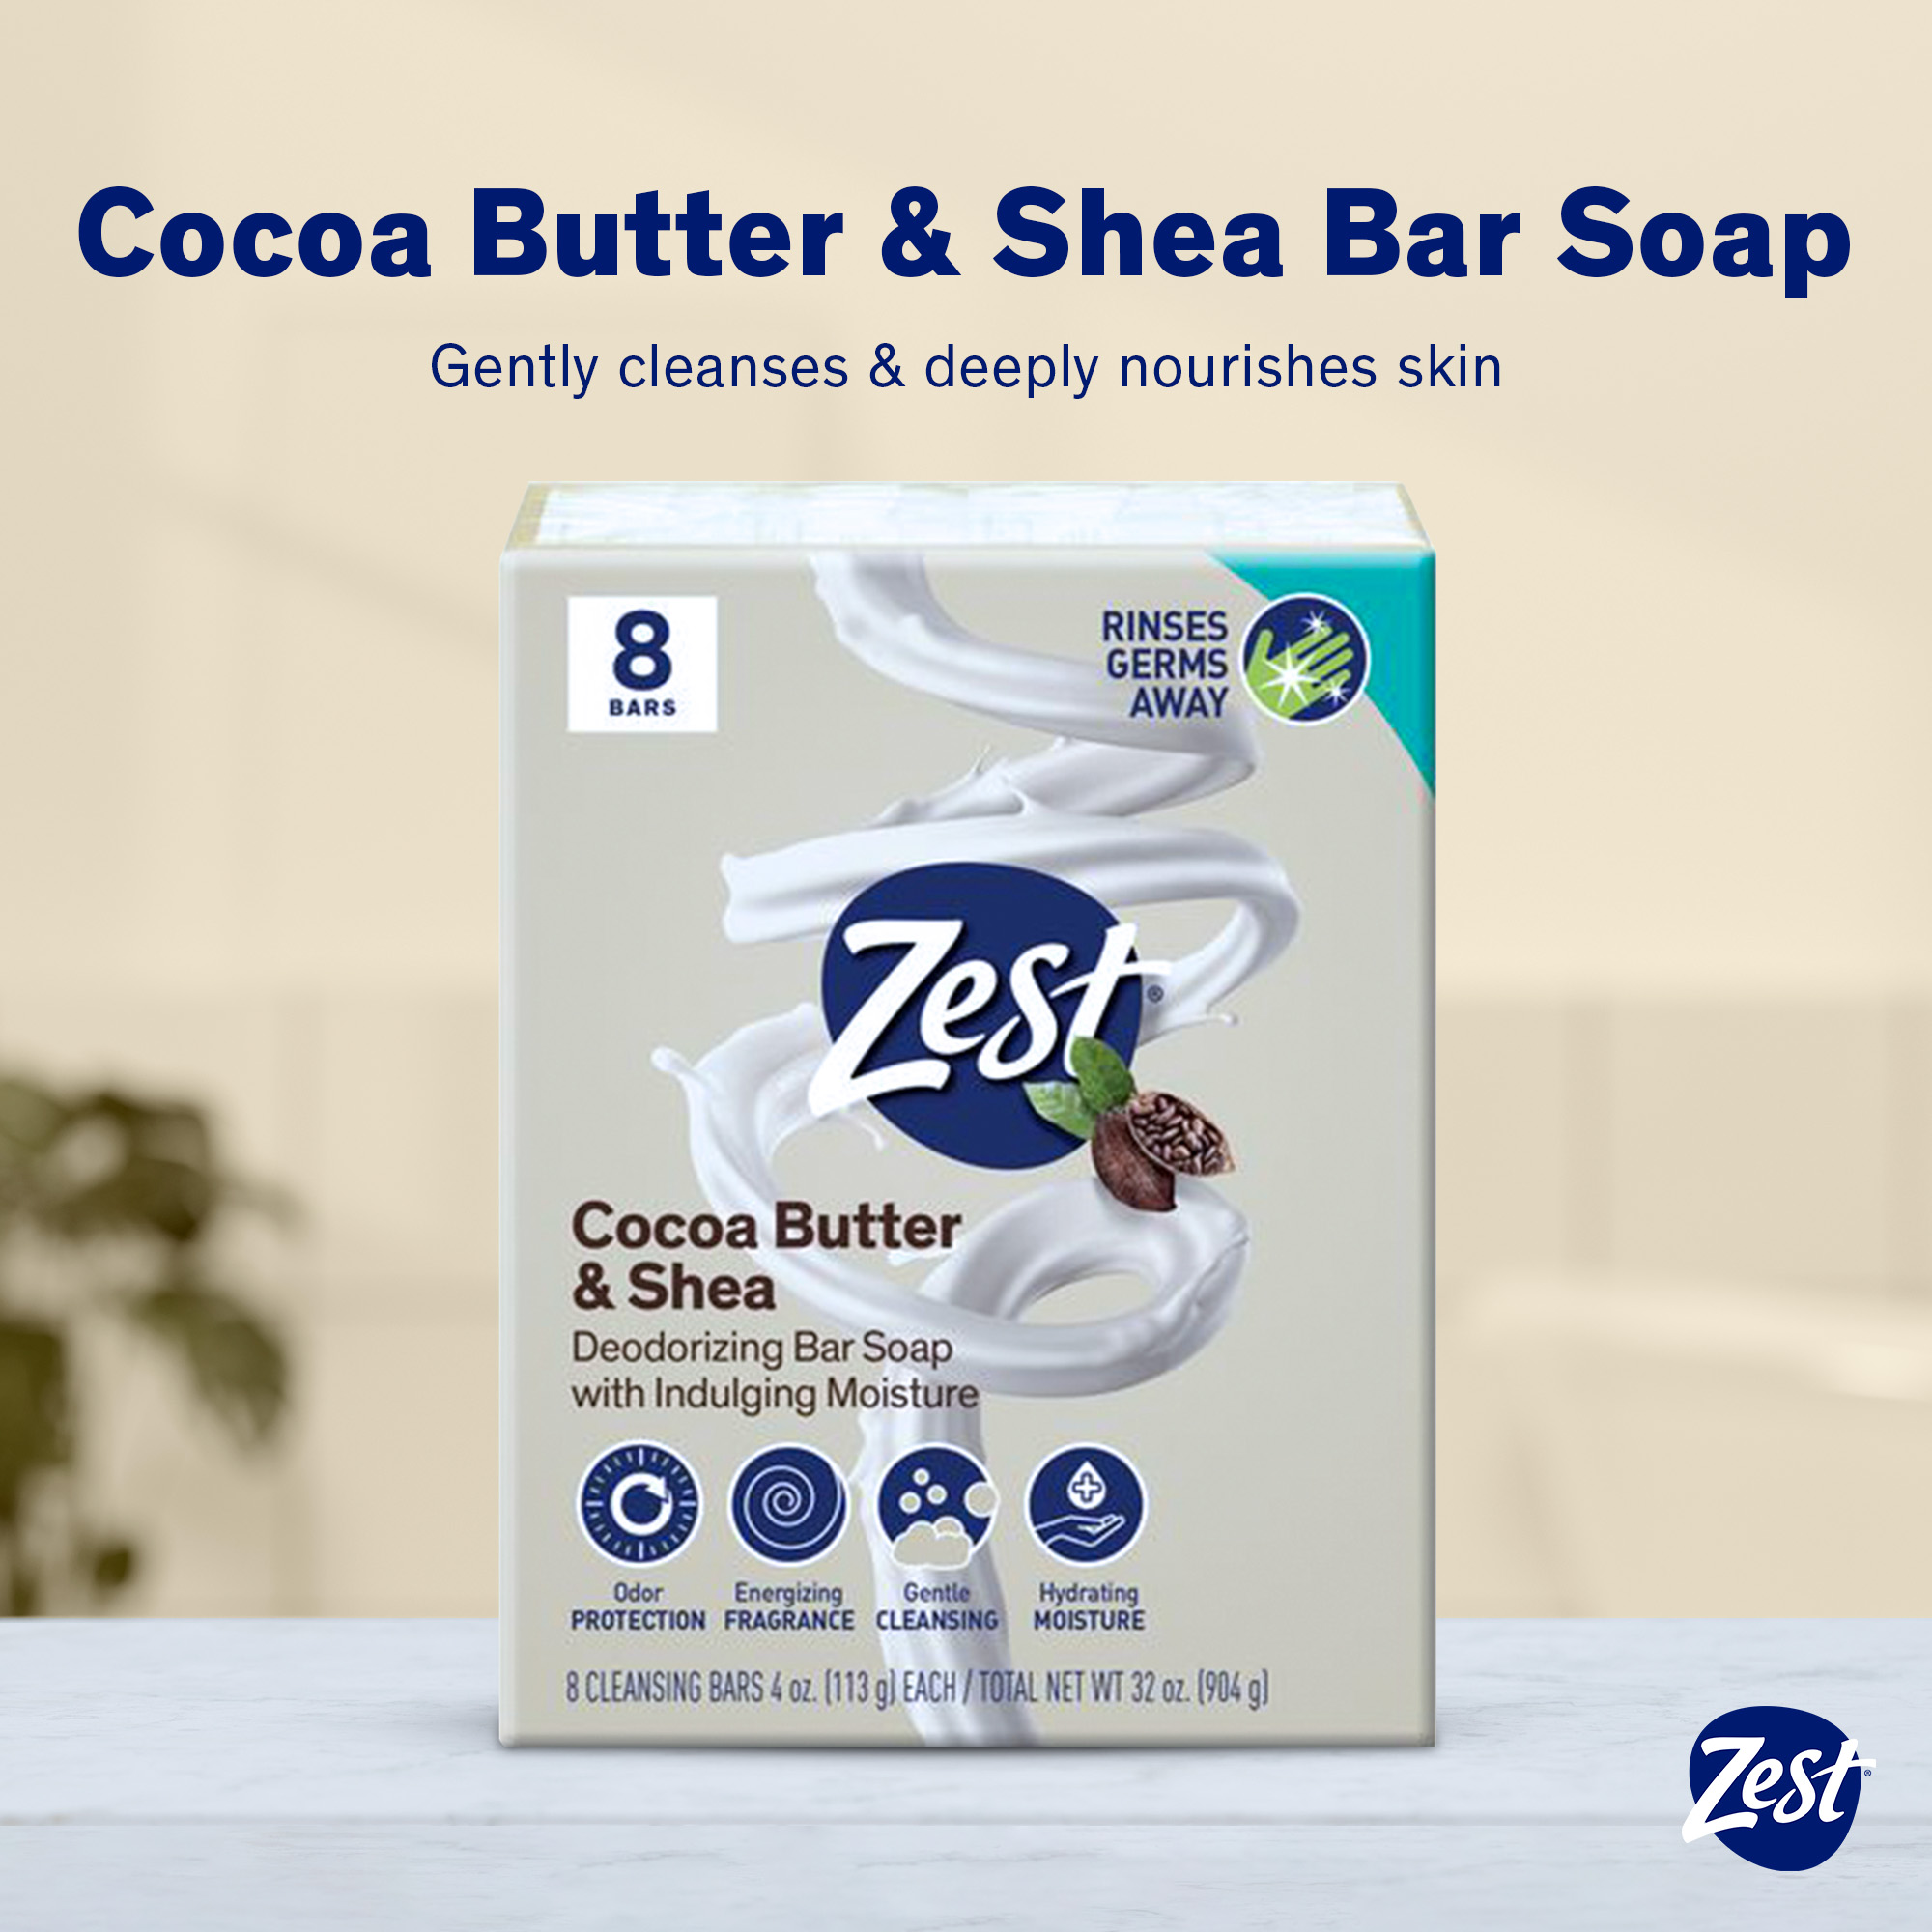 Zest Cocoa Butter & Shea Bar Soap, for All Skin Types, 4 oz, 8 Bars - image 2 of 7